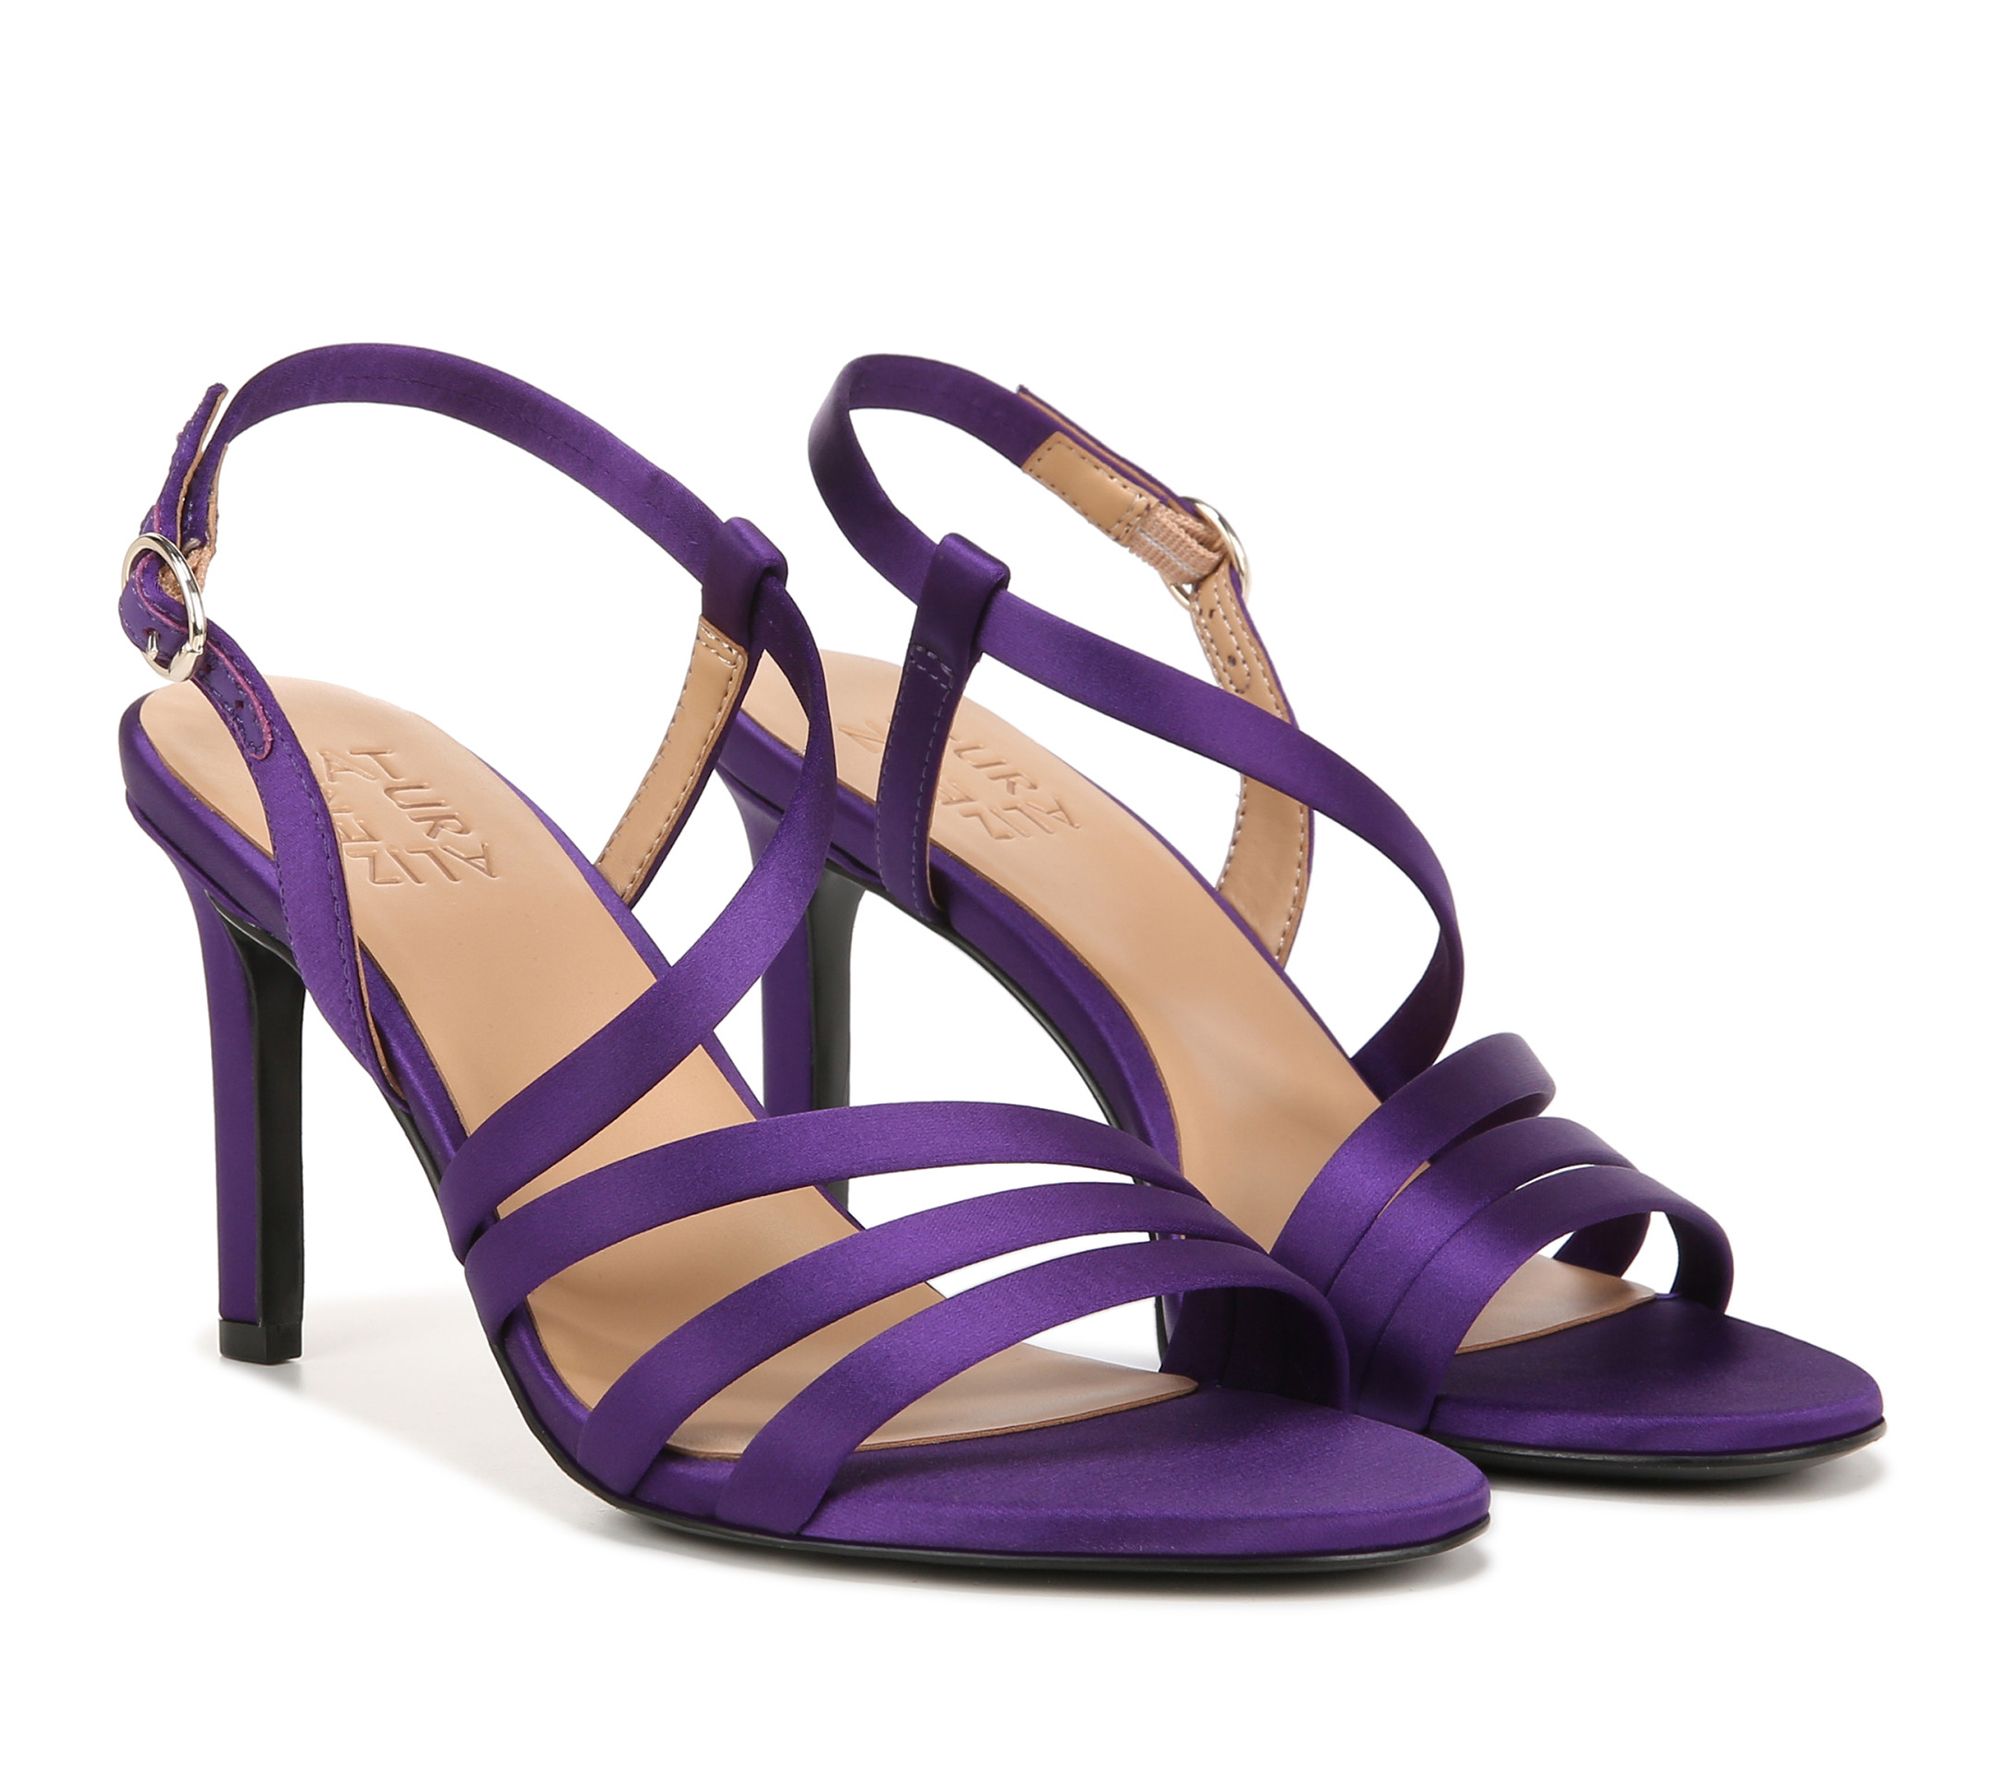 Naturalizer Strappy Sandals - Kimberly - QVC.com